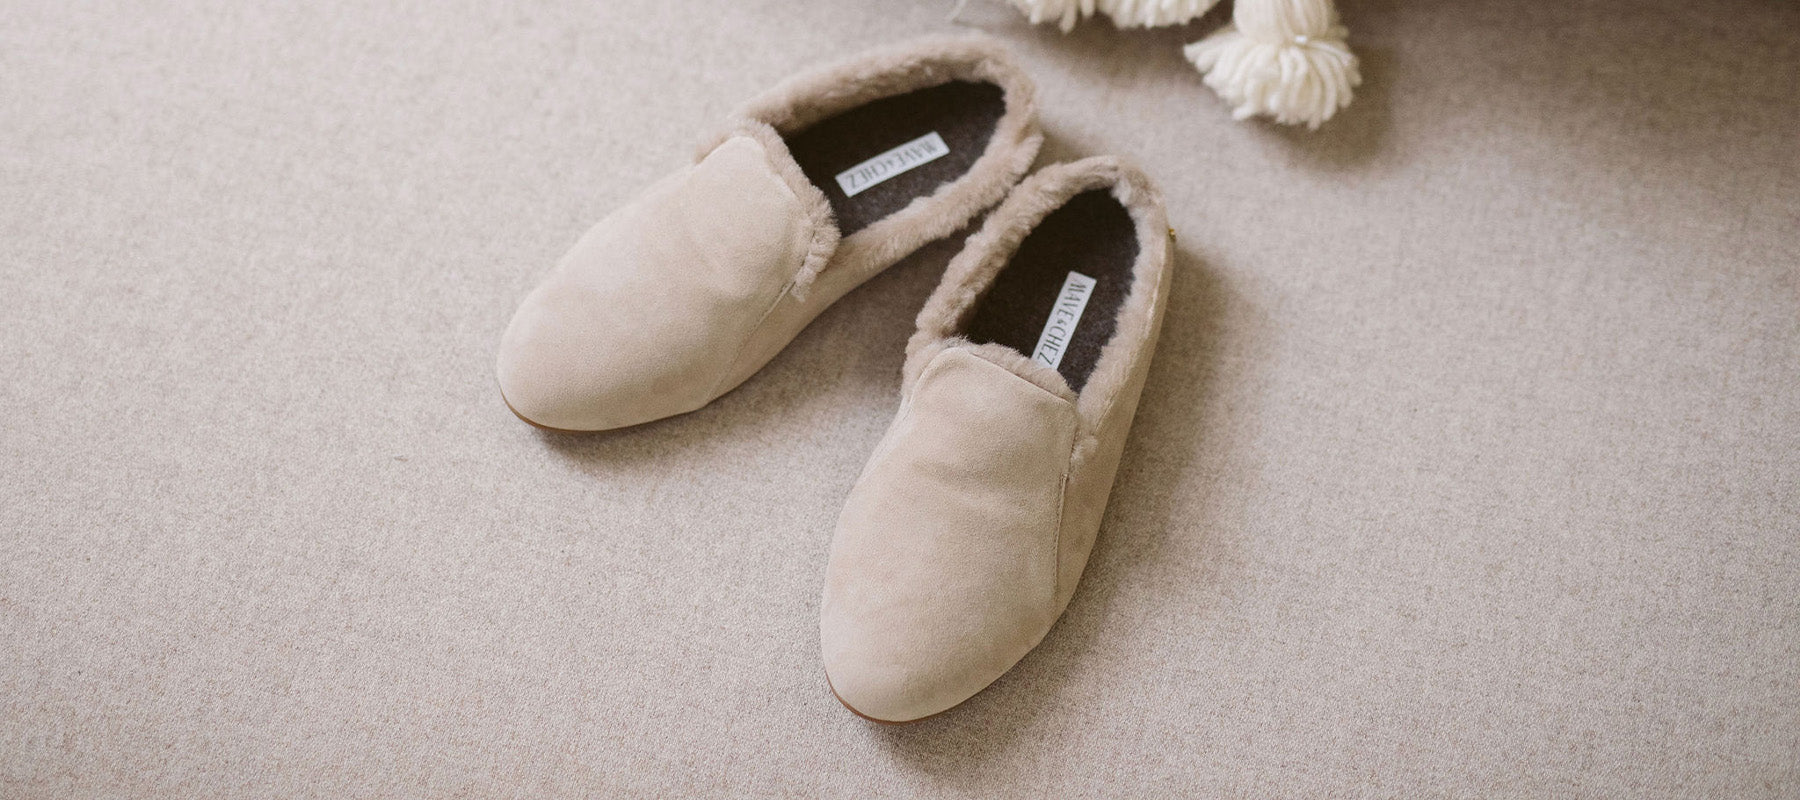 Mave & Chez Slippers: A Pregnancy Game Changer